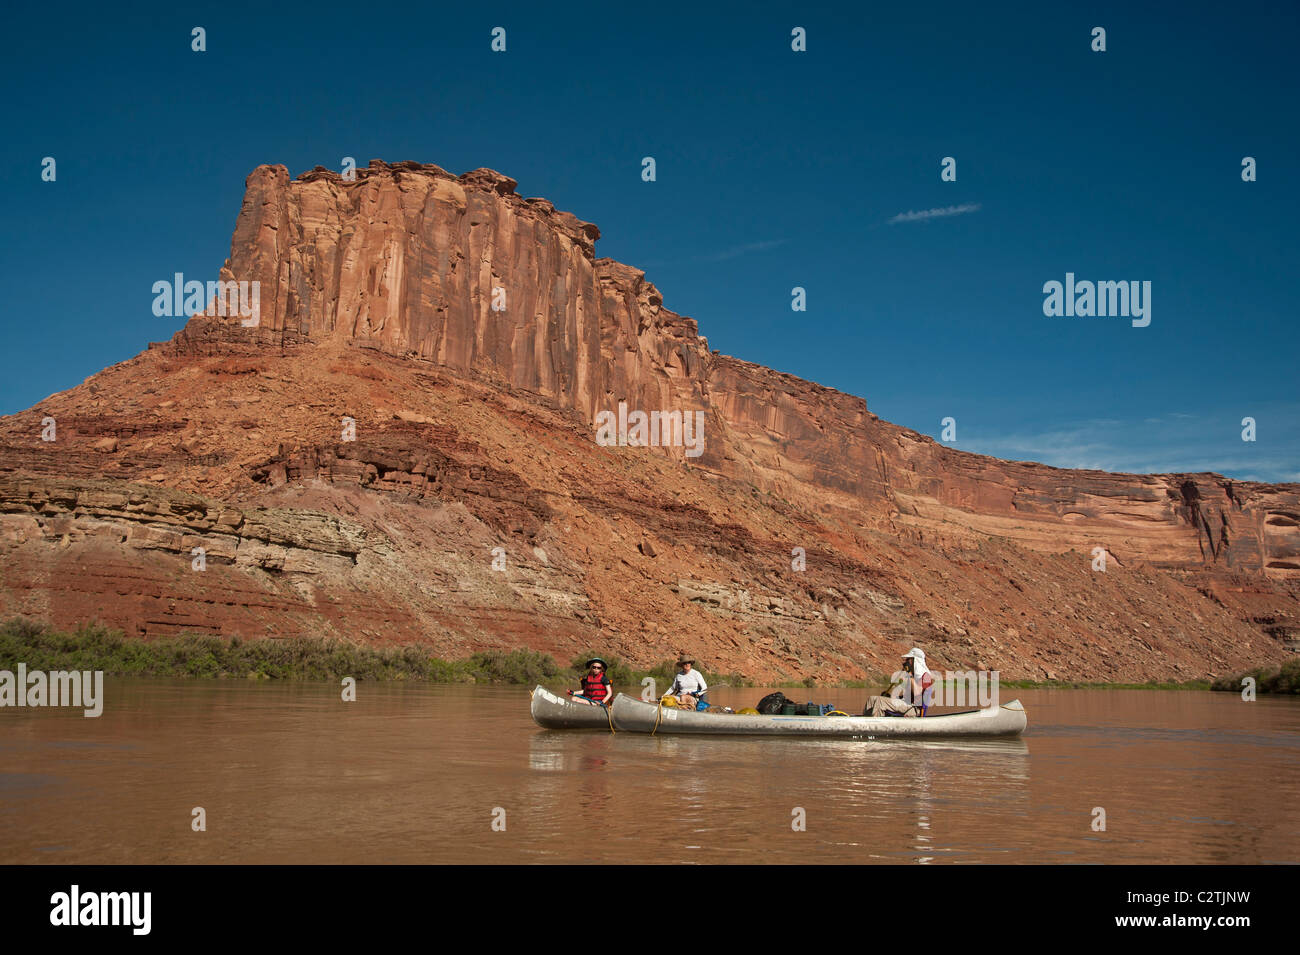 Family canoeing down a desert river in the canyons of Utah Stock Photo